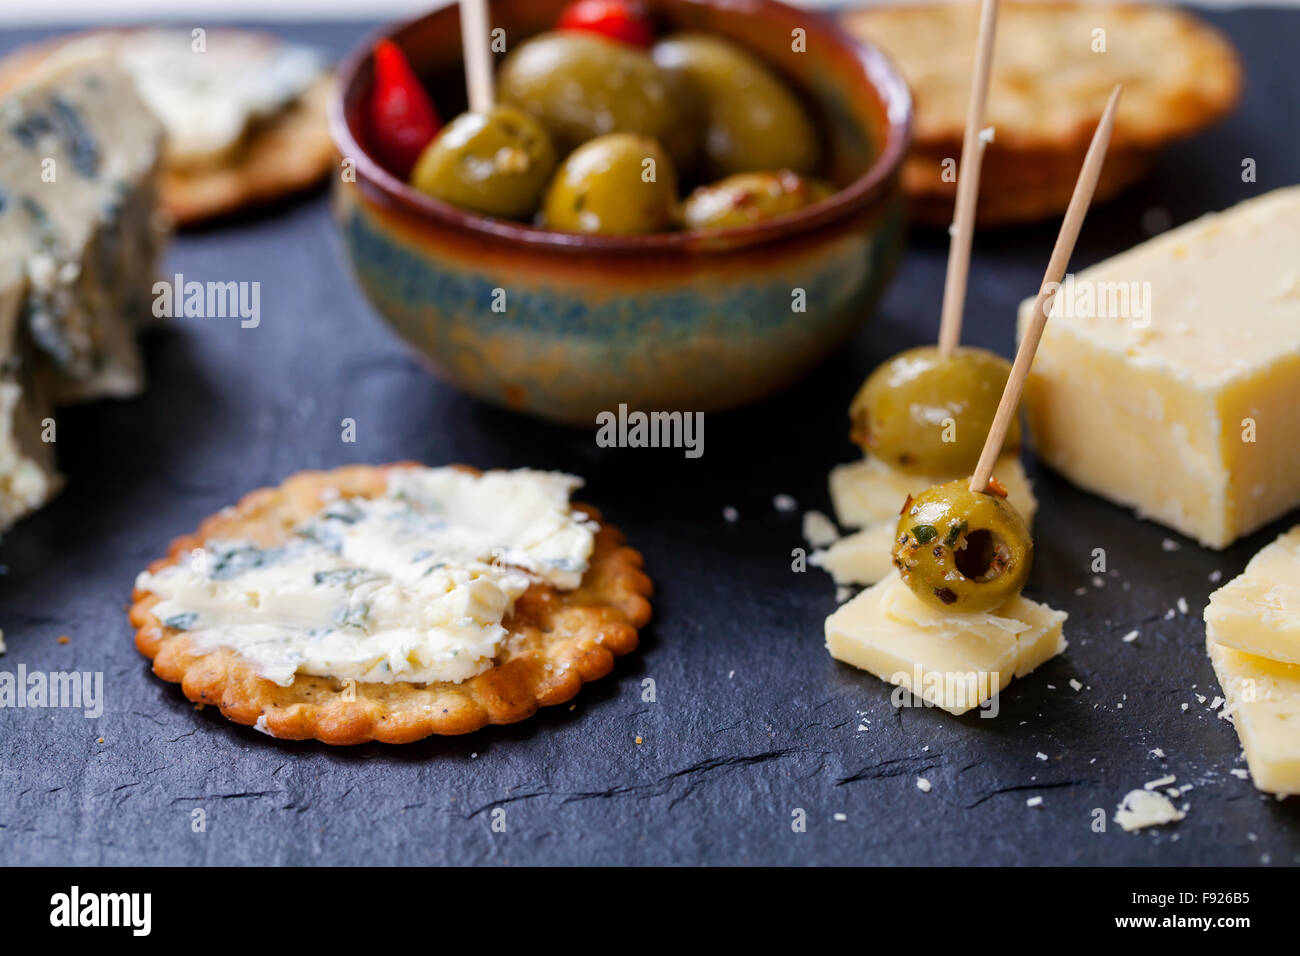 Olives, cheese and biscuits Stock Photo